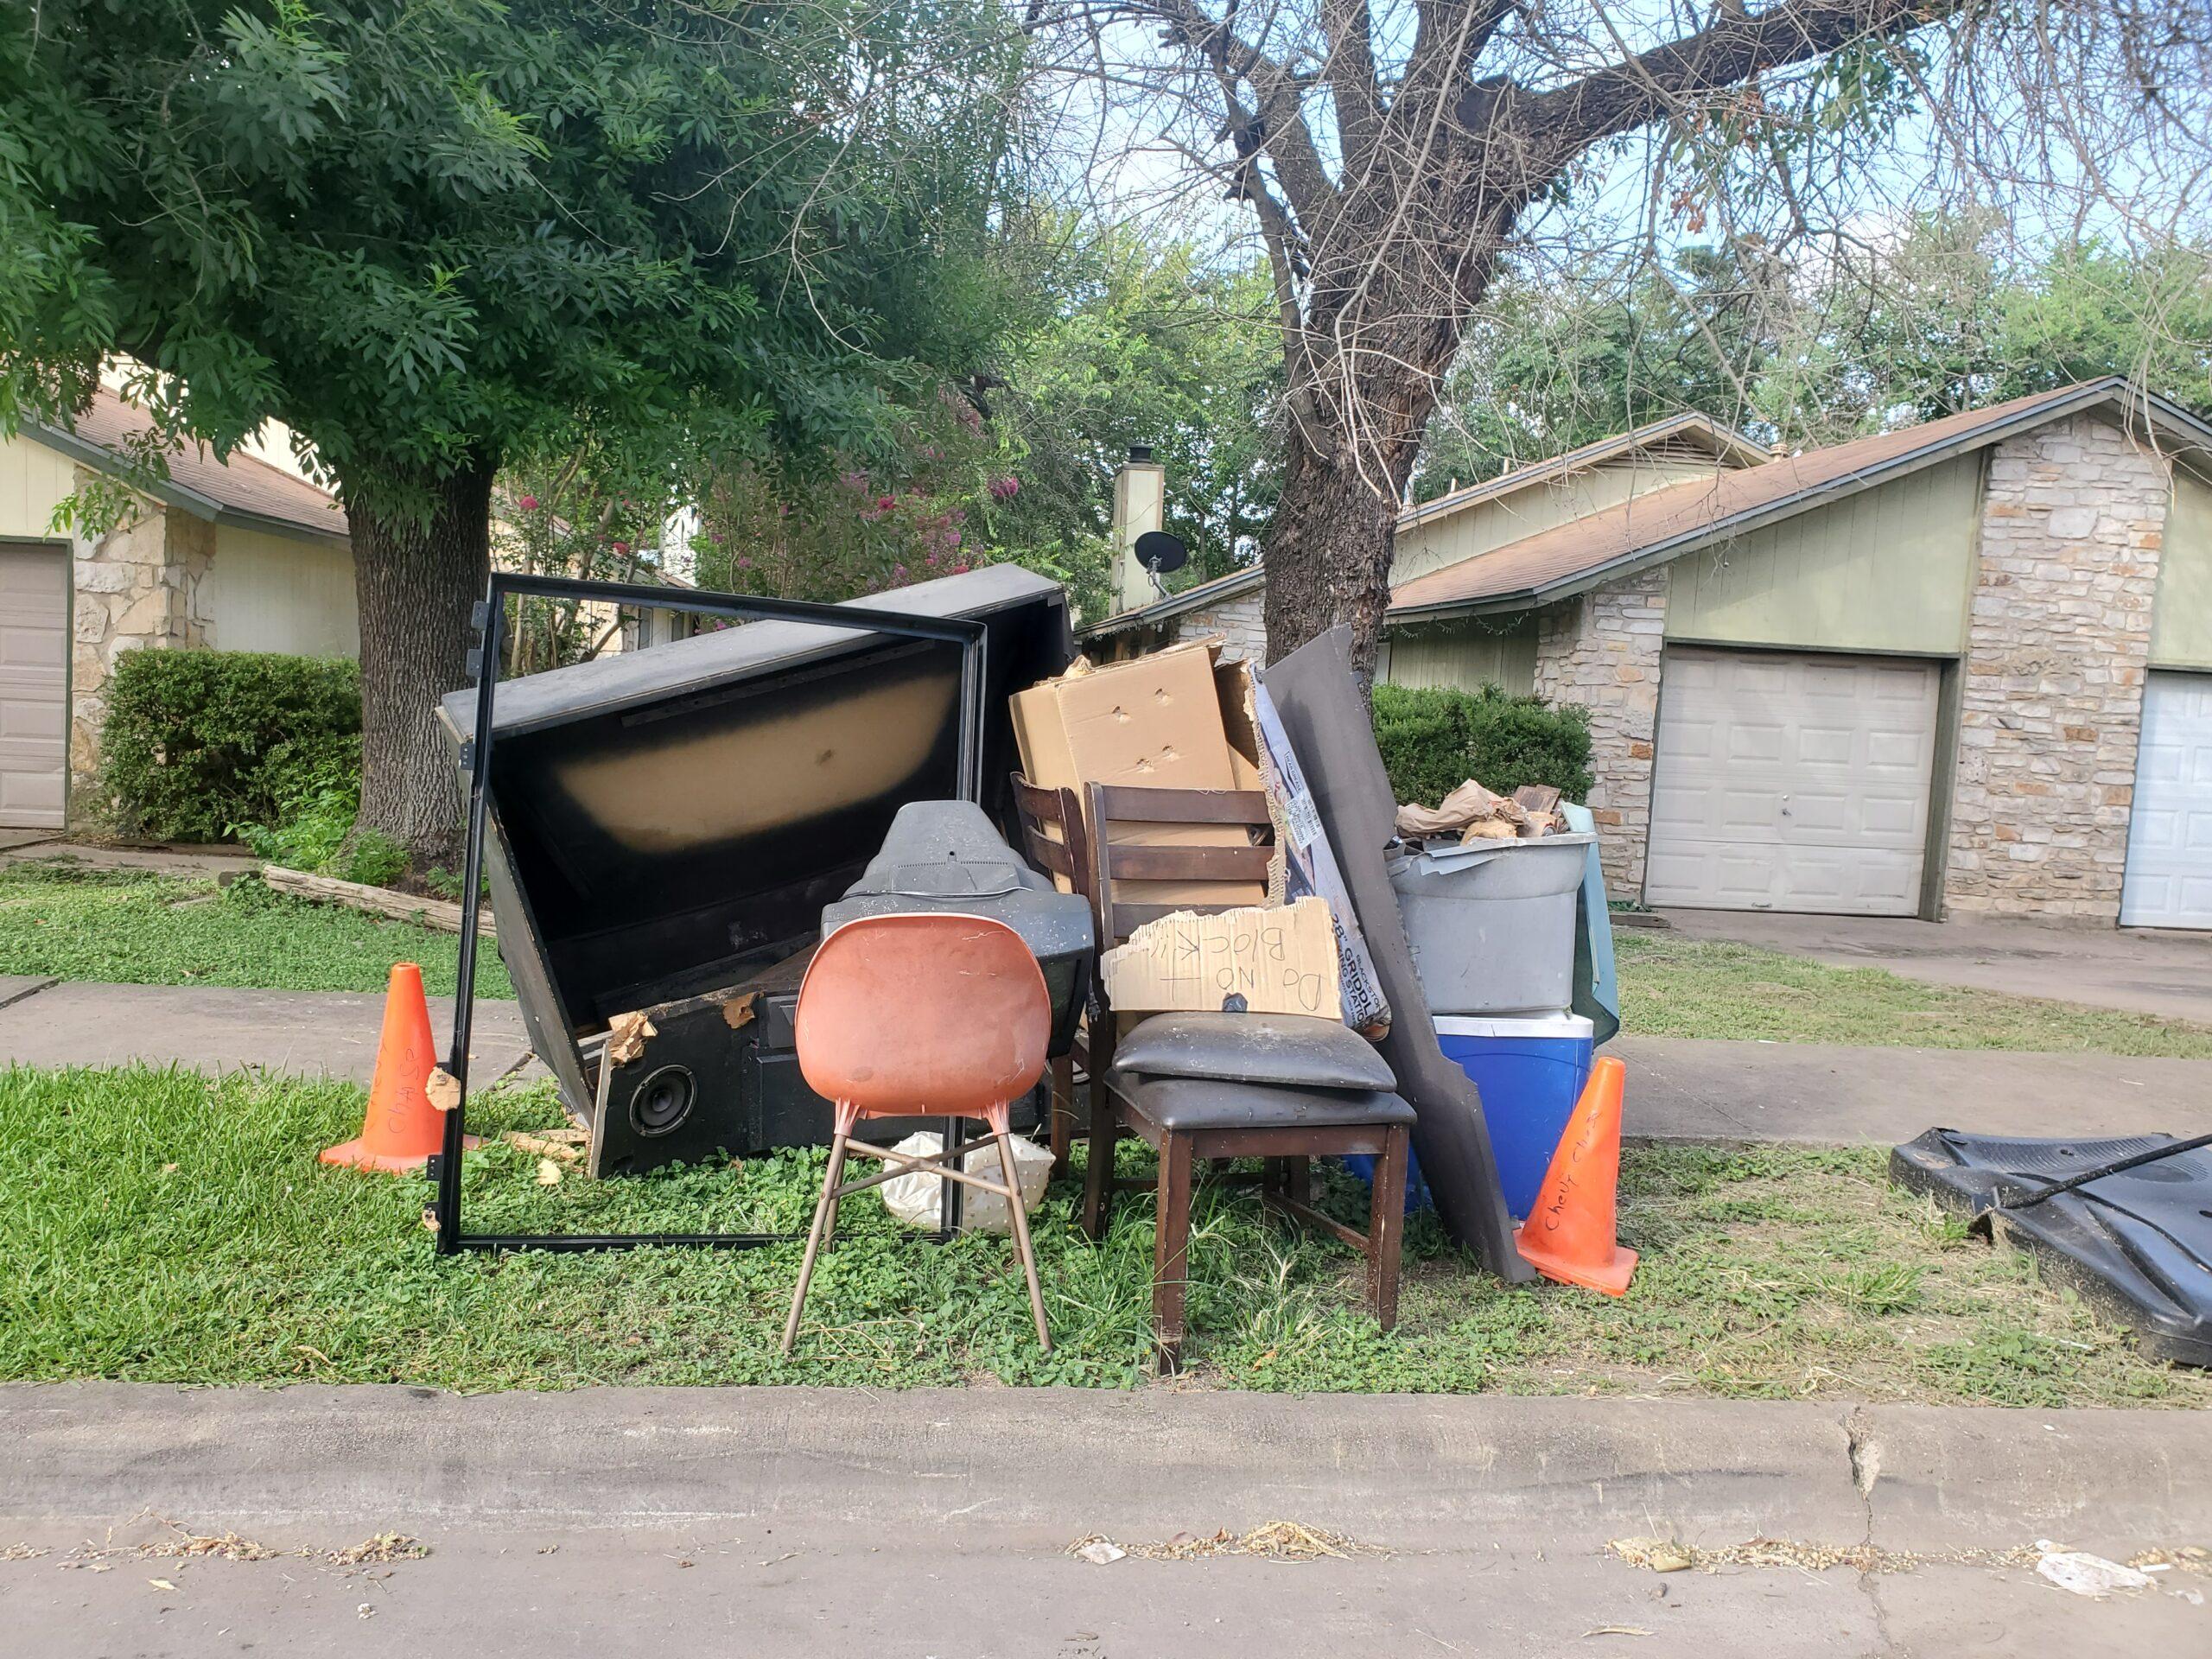 Residential junk removal from property management